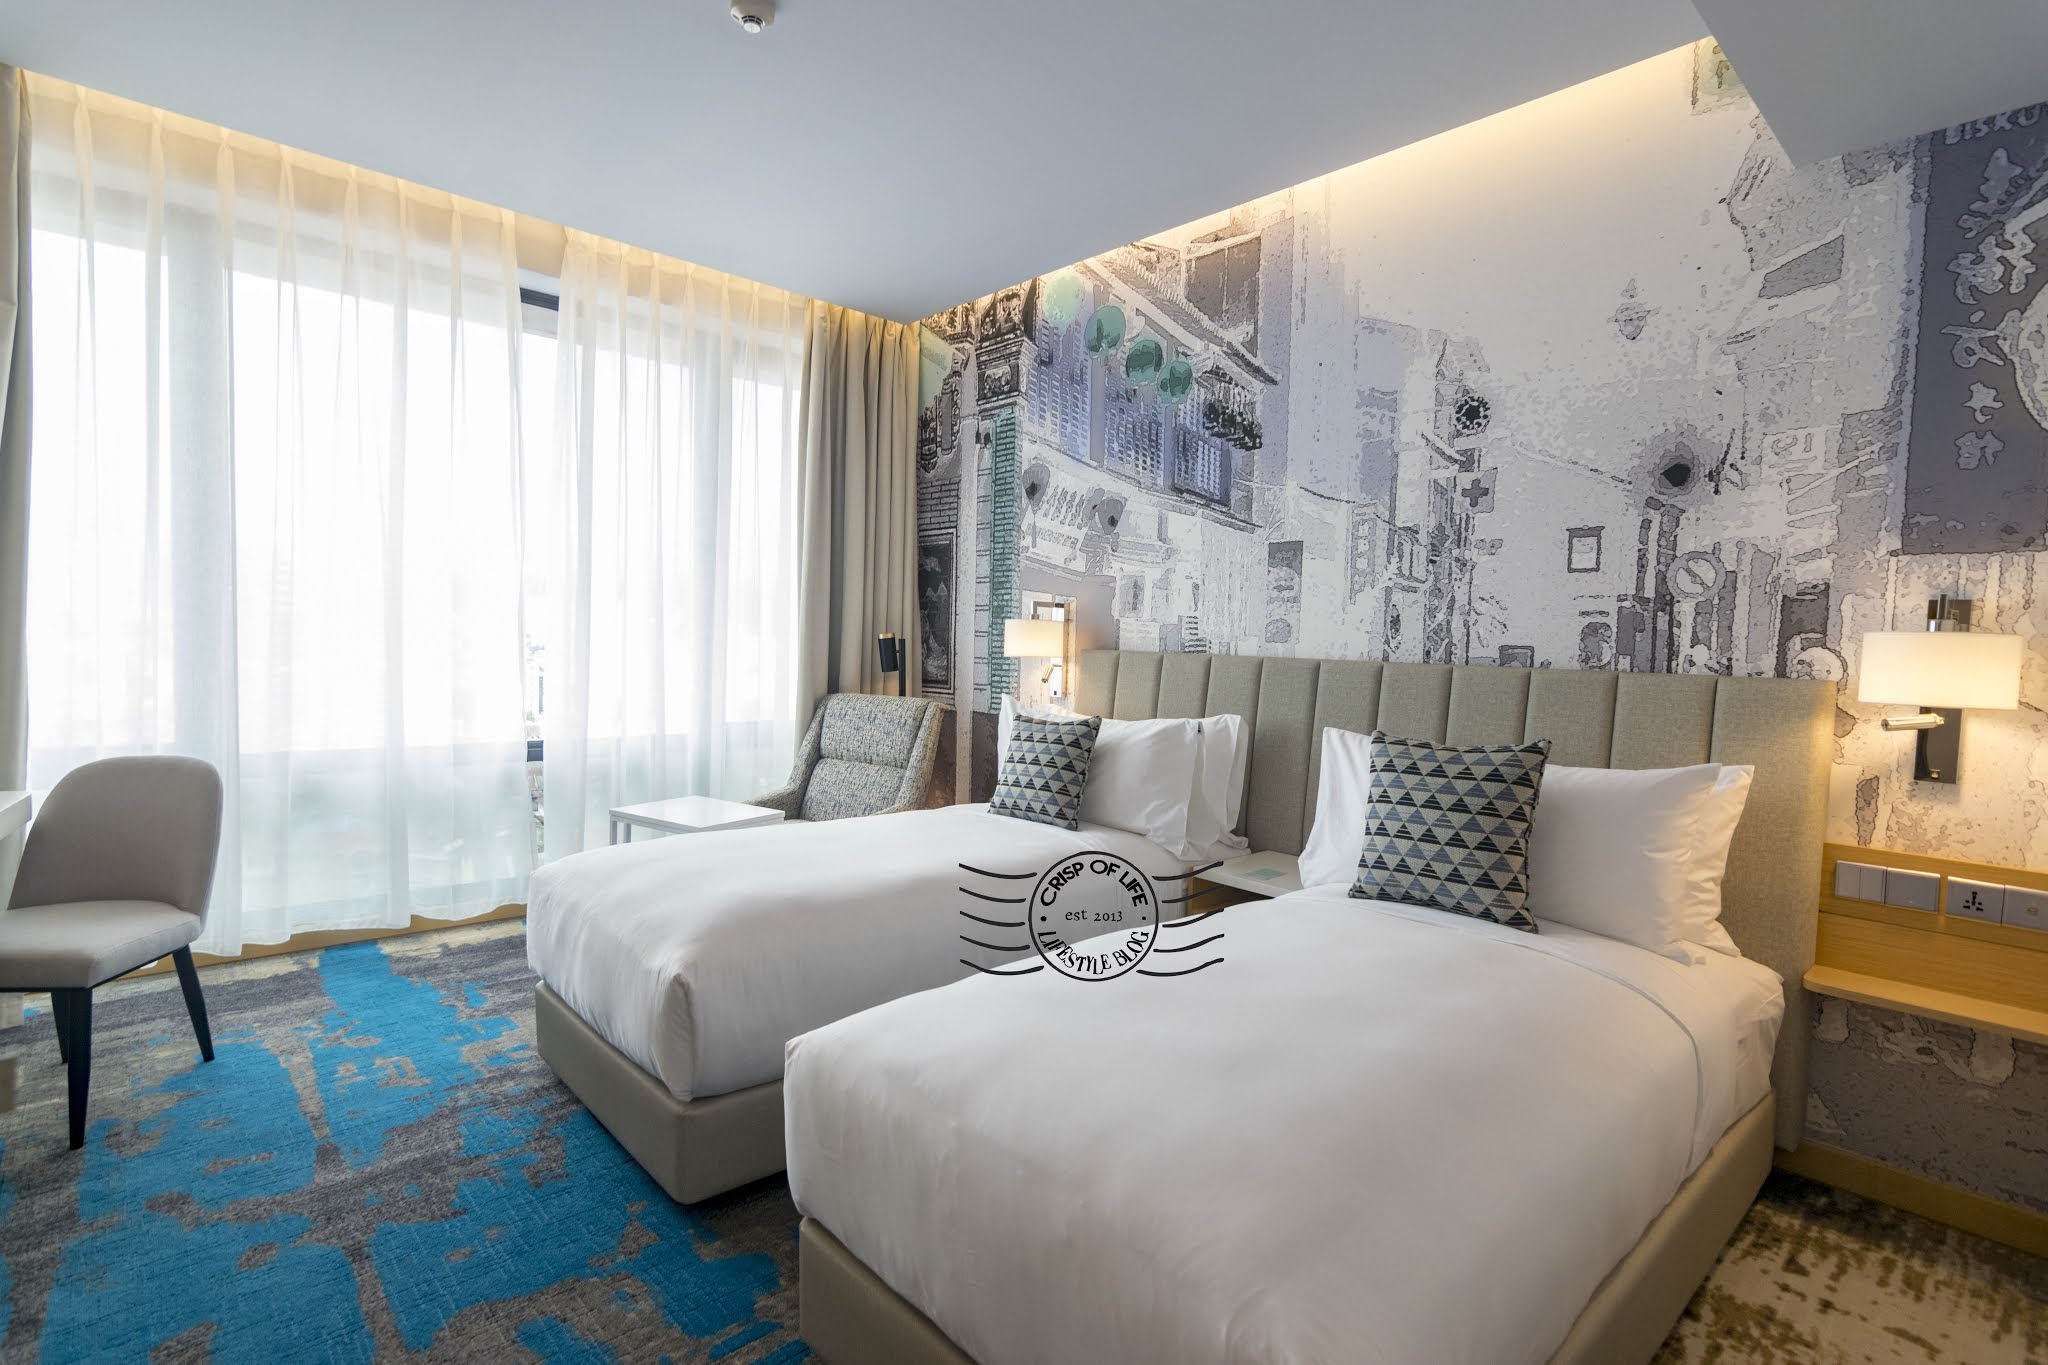 6 Reasons You Should Stay at OZO Hotel Georgetown Penang